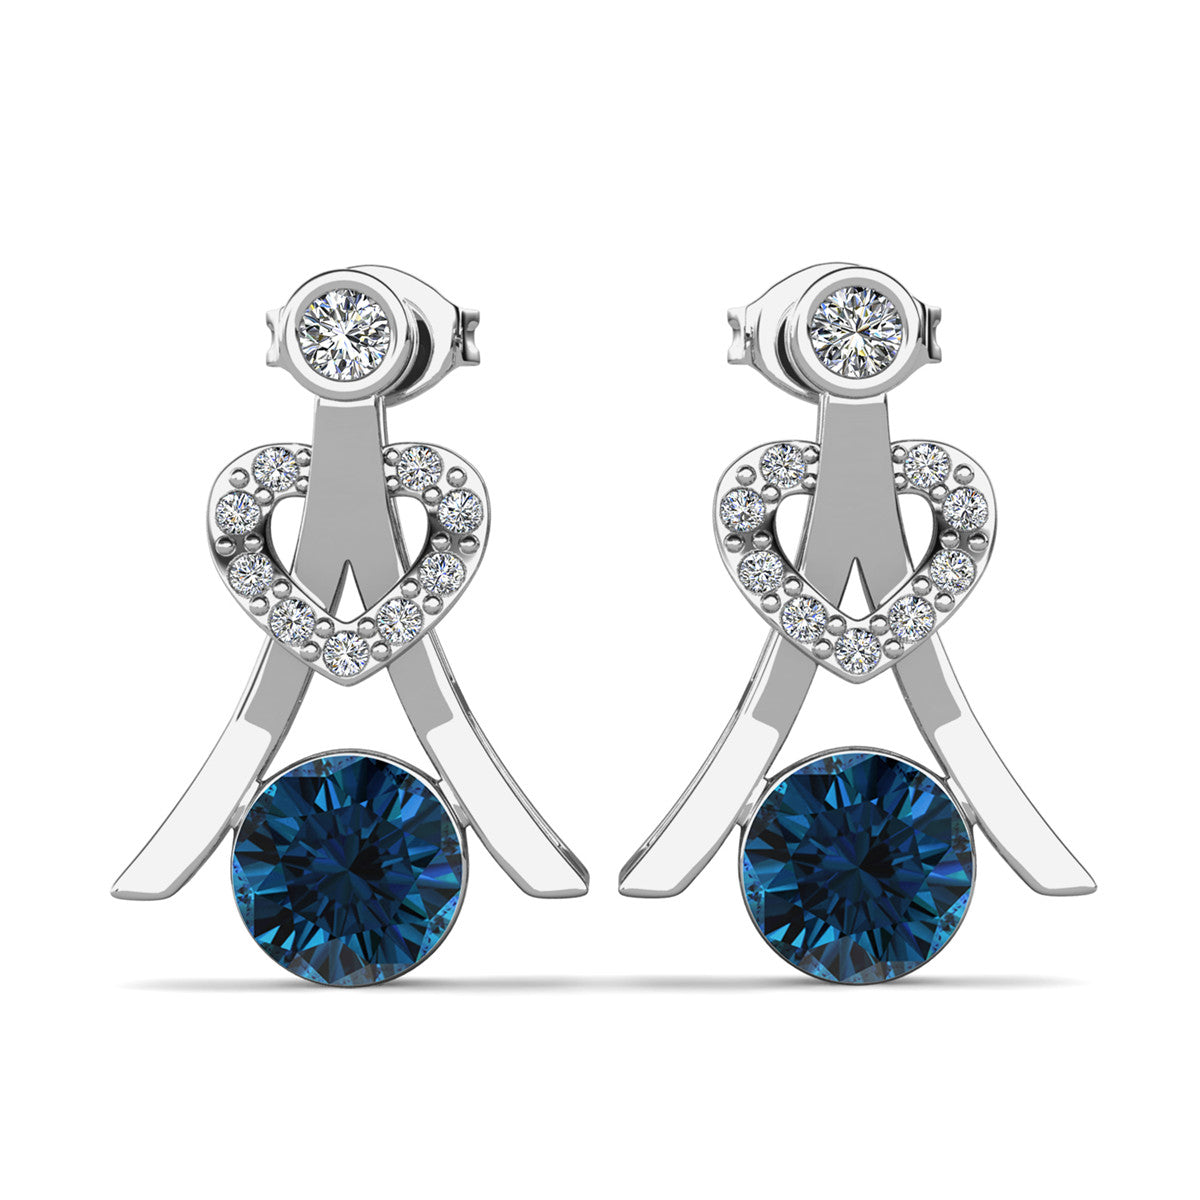 Serenity December Birthstone Blue Topaz Earrings, 18k White Gold Plated Silver Earrings with Round Cut Crystals